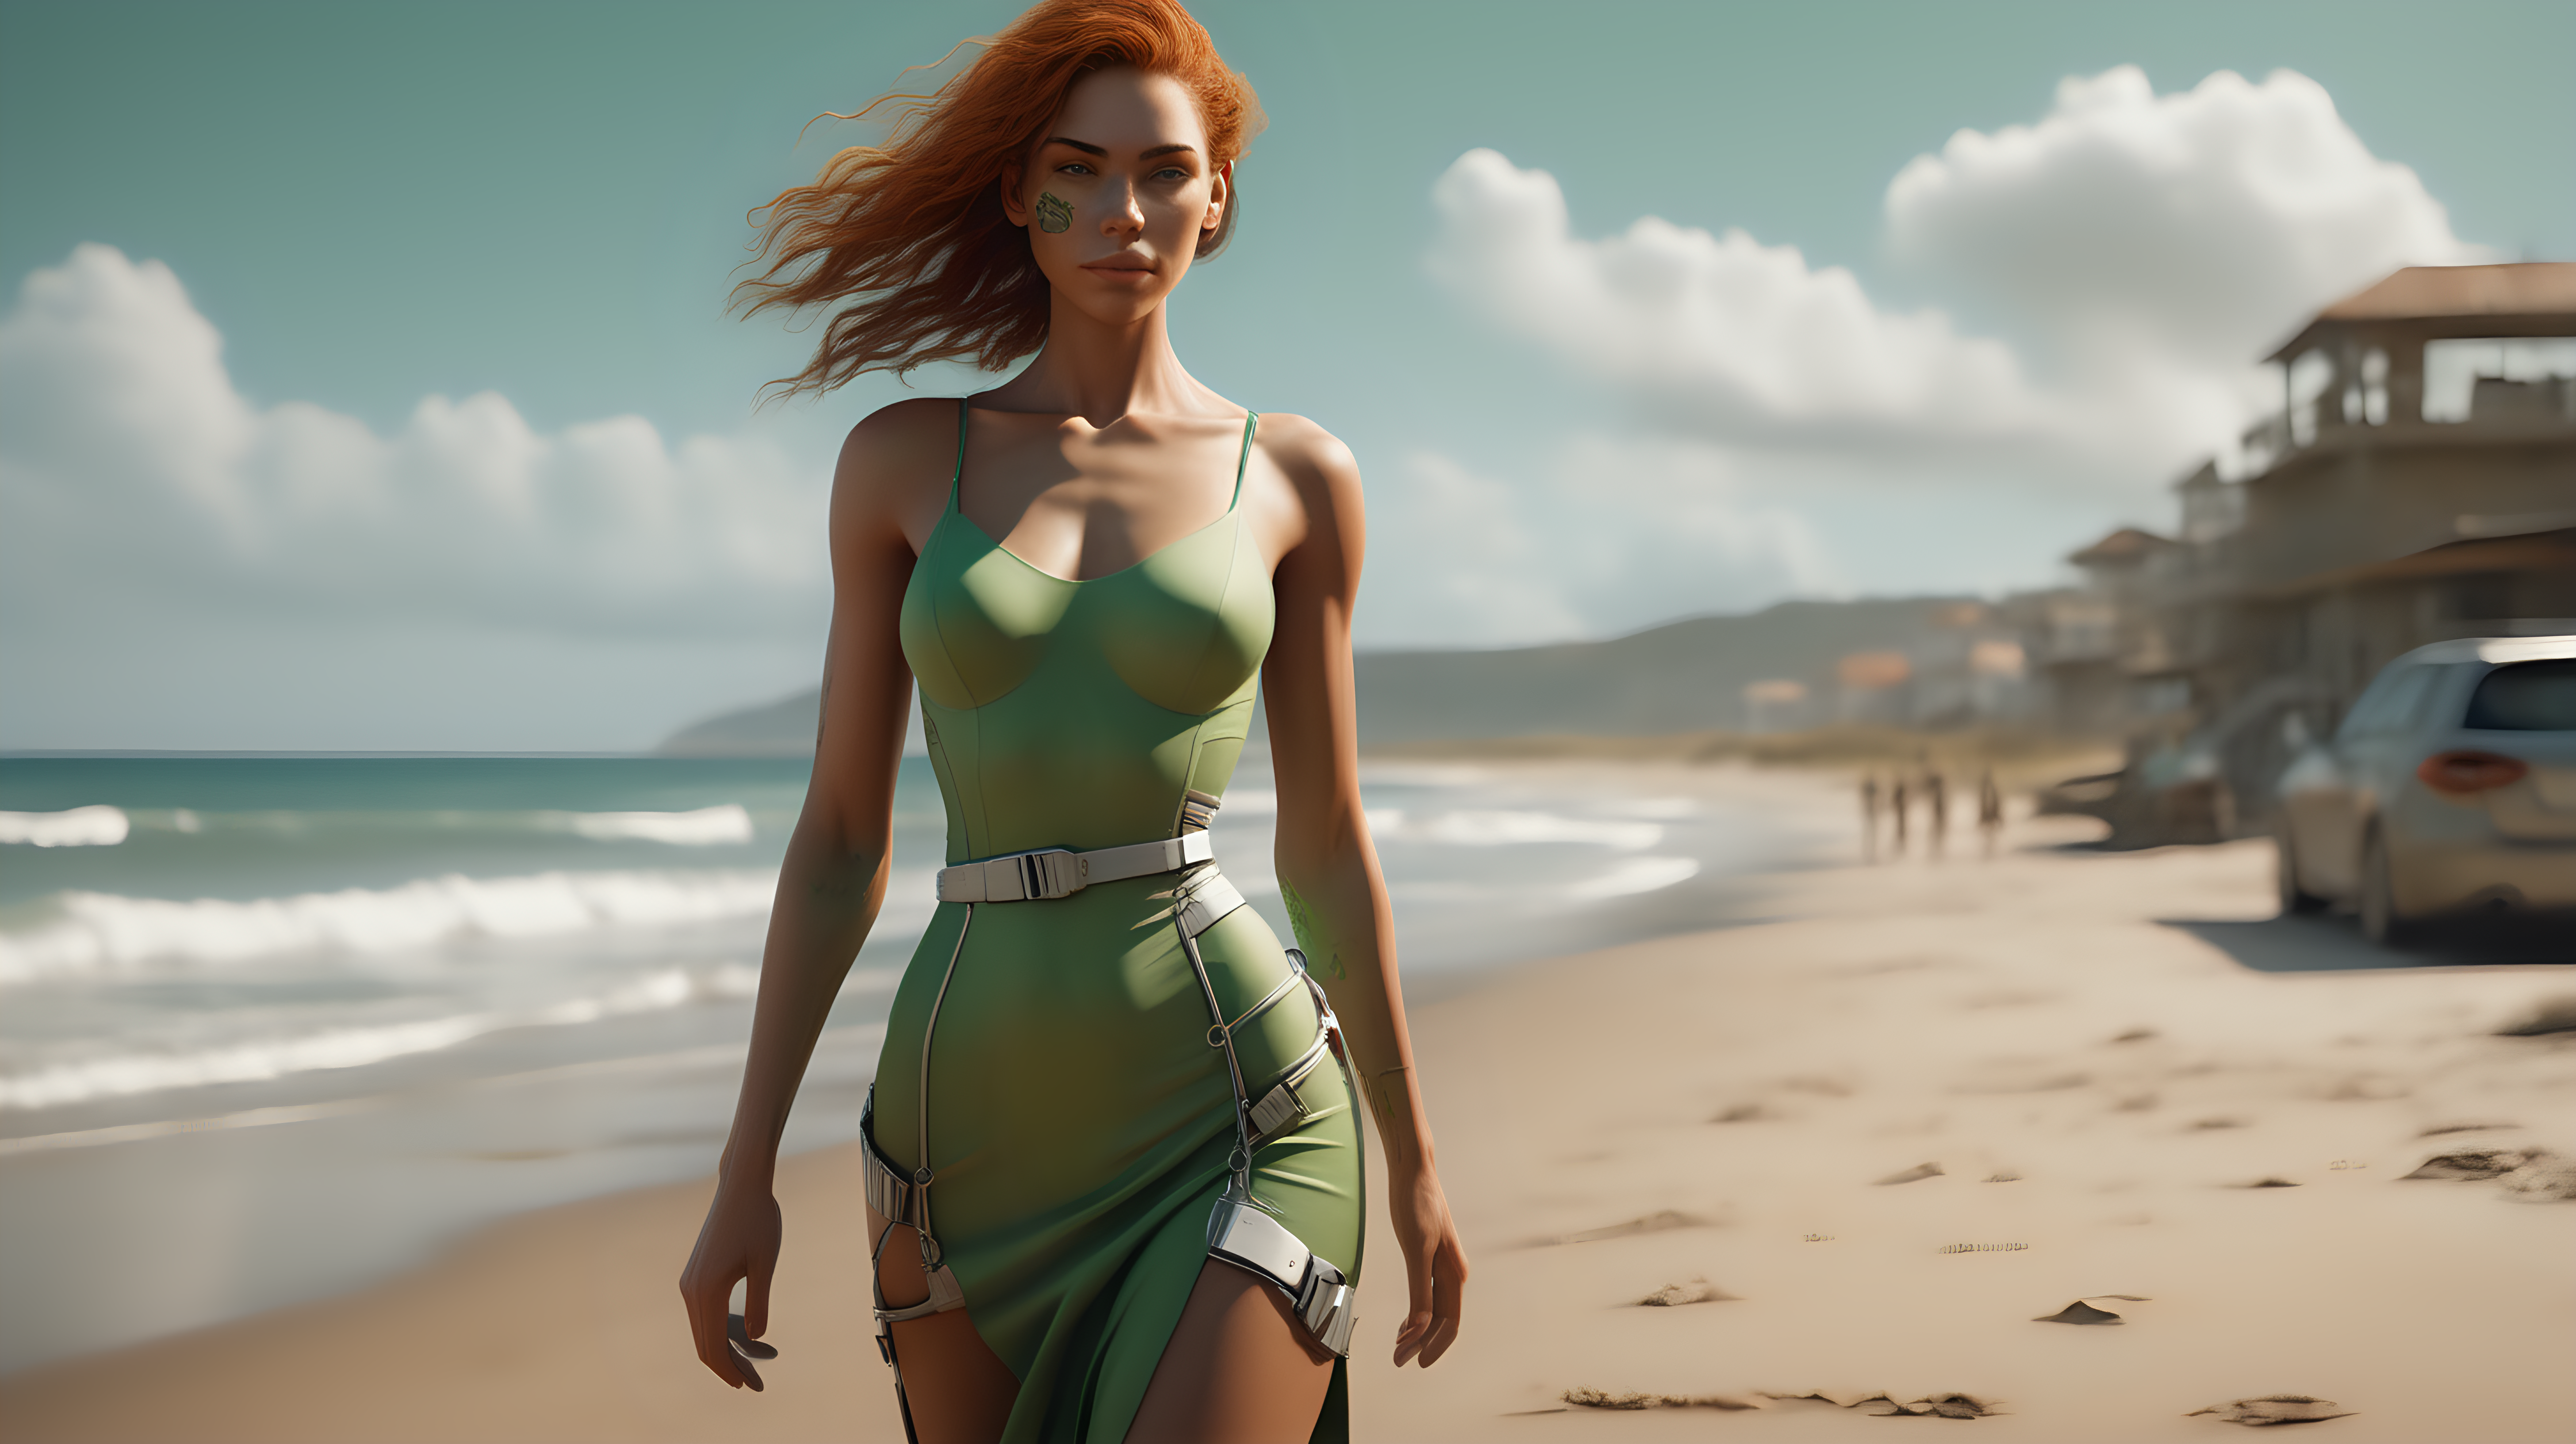 A woman cyborg in a delightful afternoon.
You can see the whole body, walking towards the camera, behind you can see the beach. She wears a green dress with thin fabric straps, which reveals the her mechanic body under the dress. Extremely realistic textures and warm colors give the final touch. Sharp focus and realistic shadows add to the scene. A perfect example of cinematic shot. Use muted colors to add to the scene